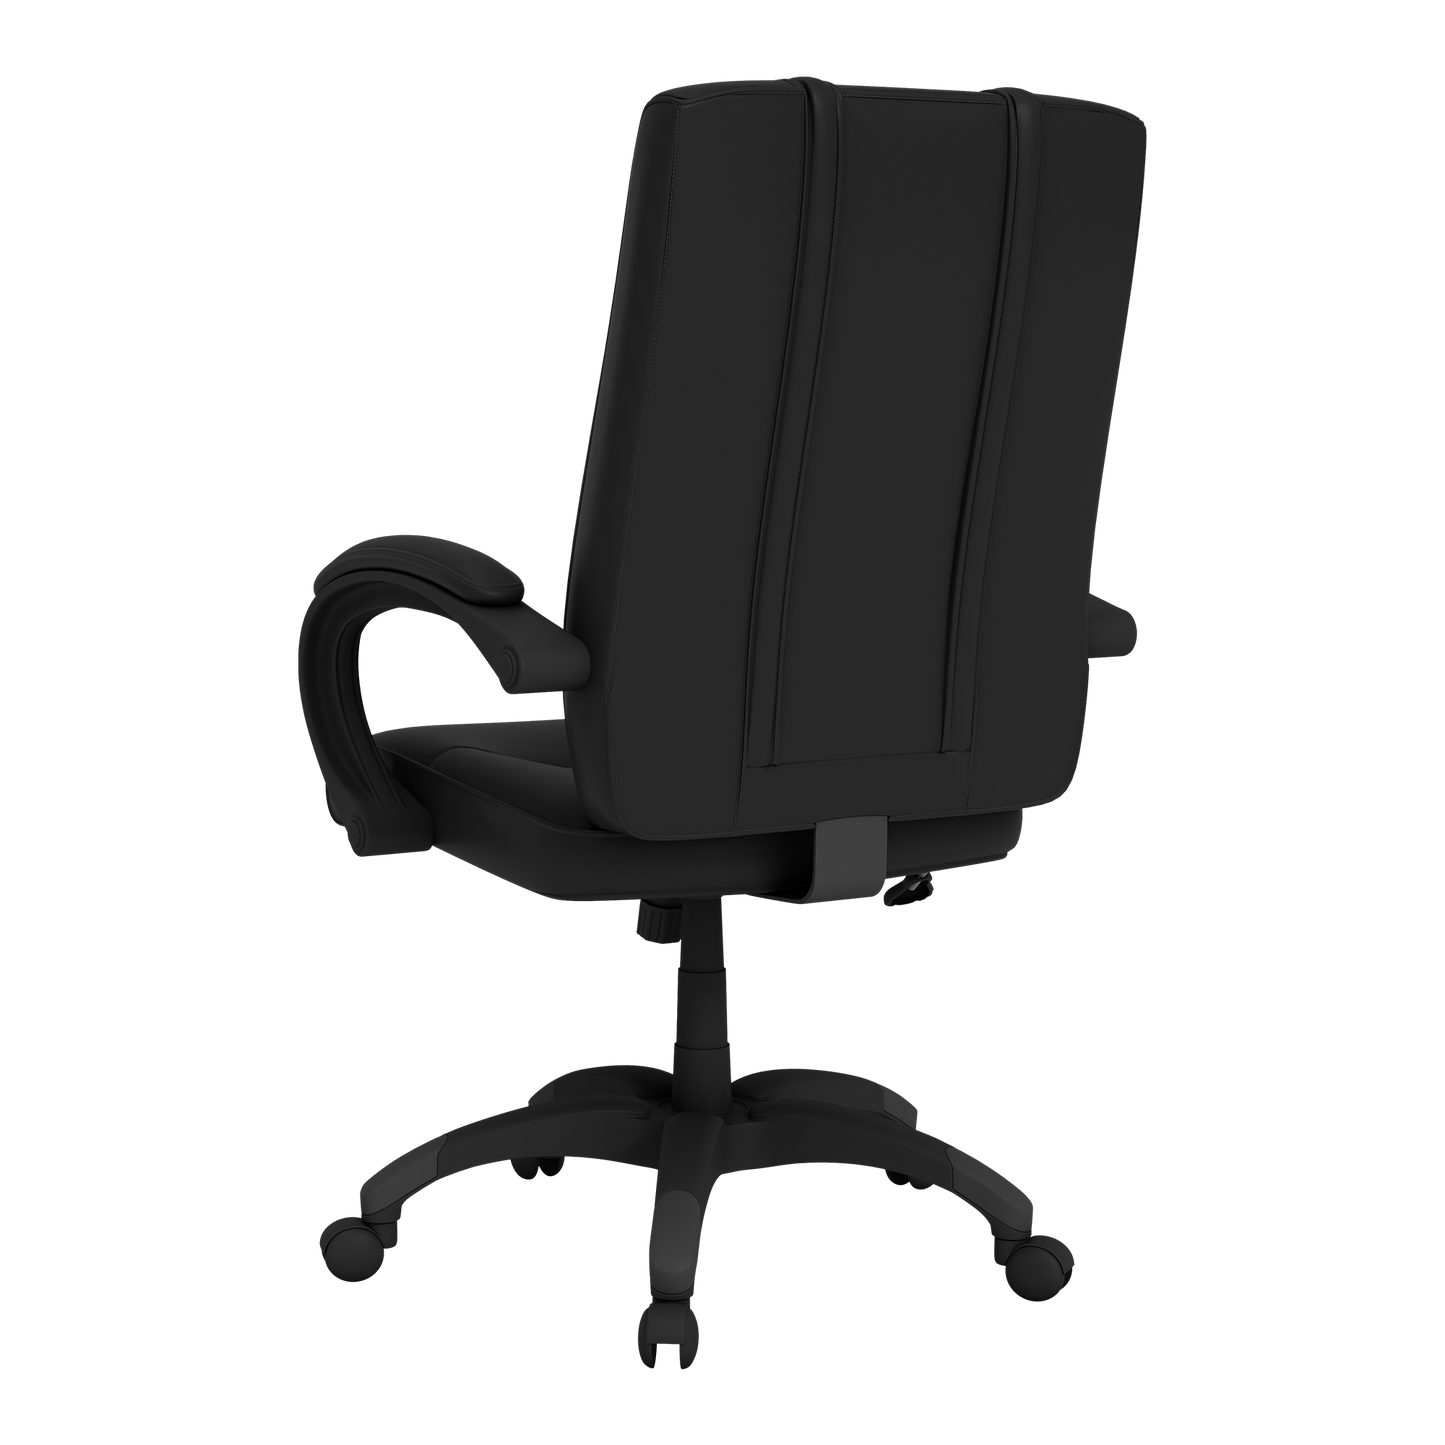 Office Chair 1000 with Nebraska Cornhuskers Secondary